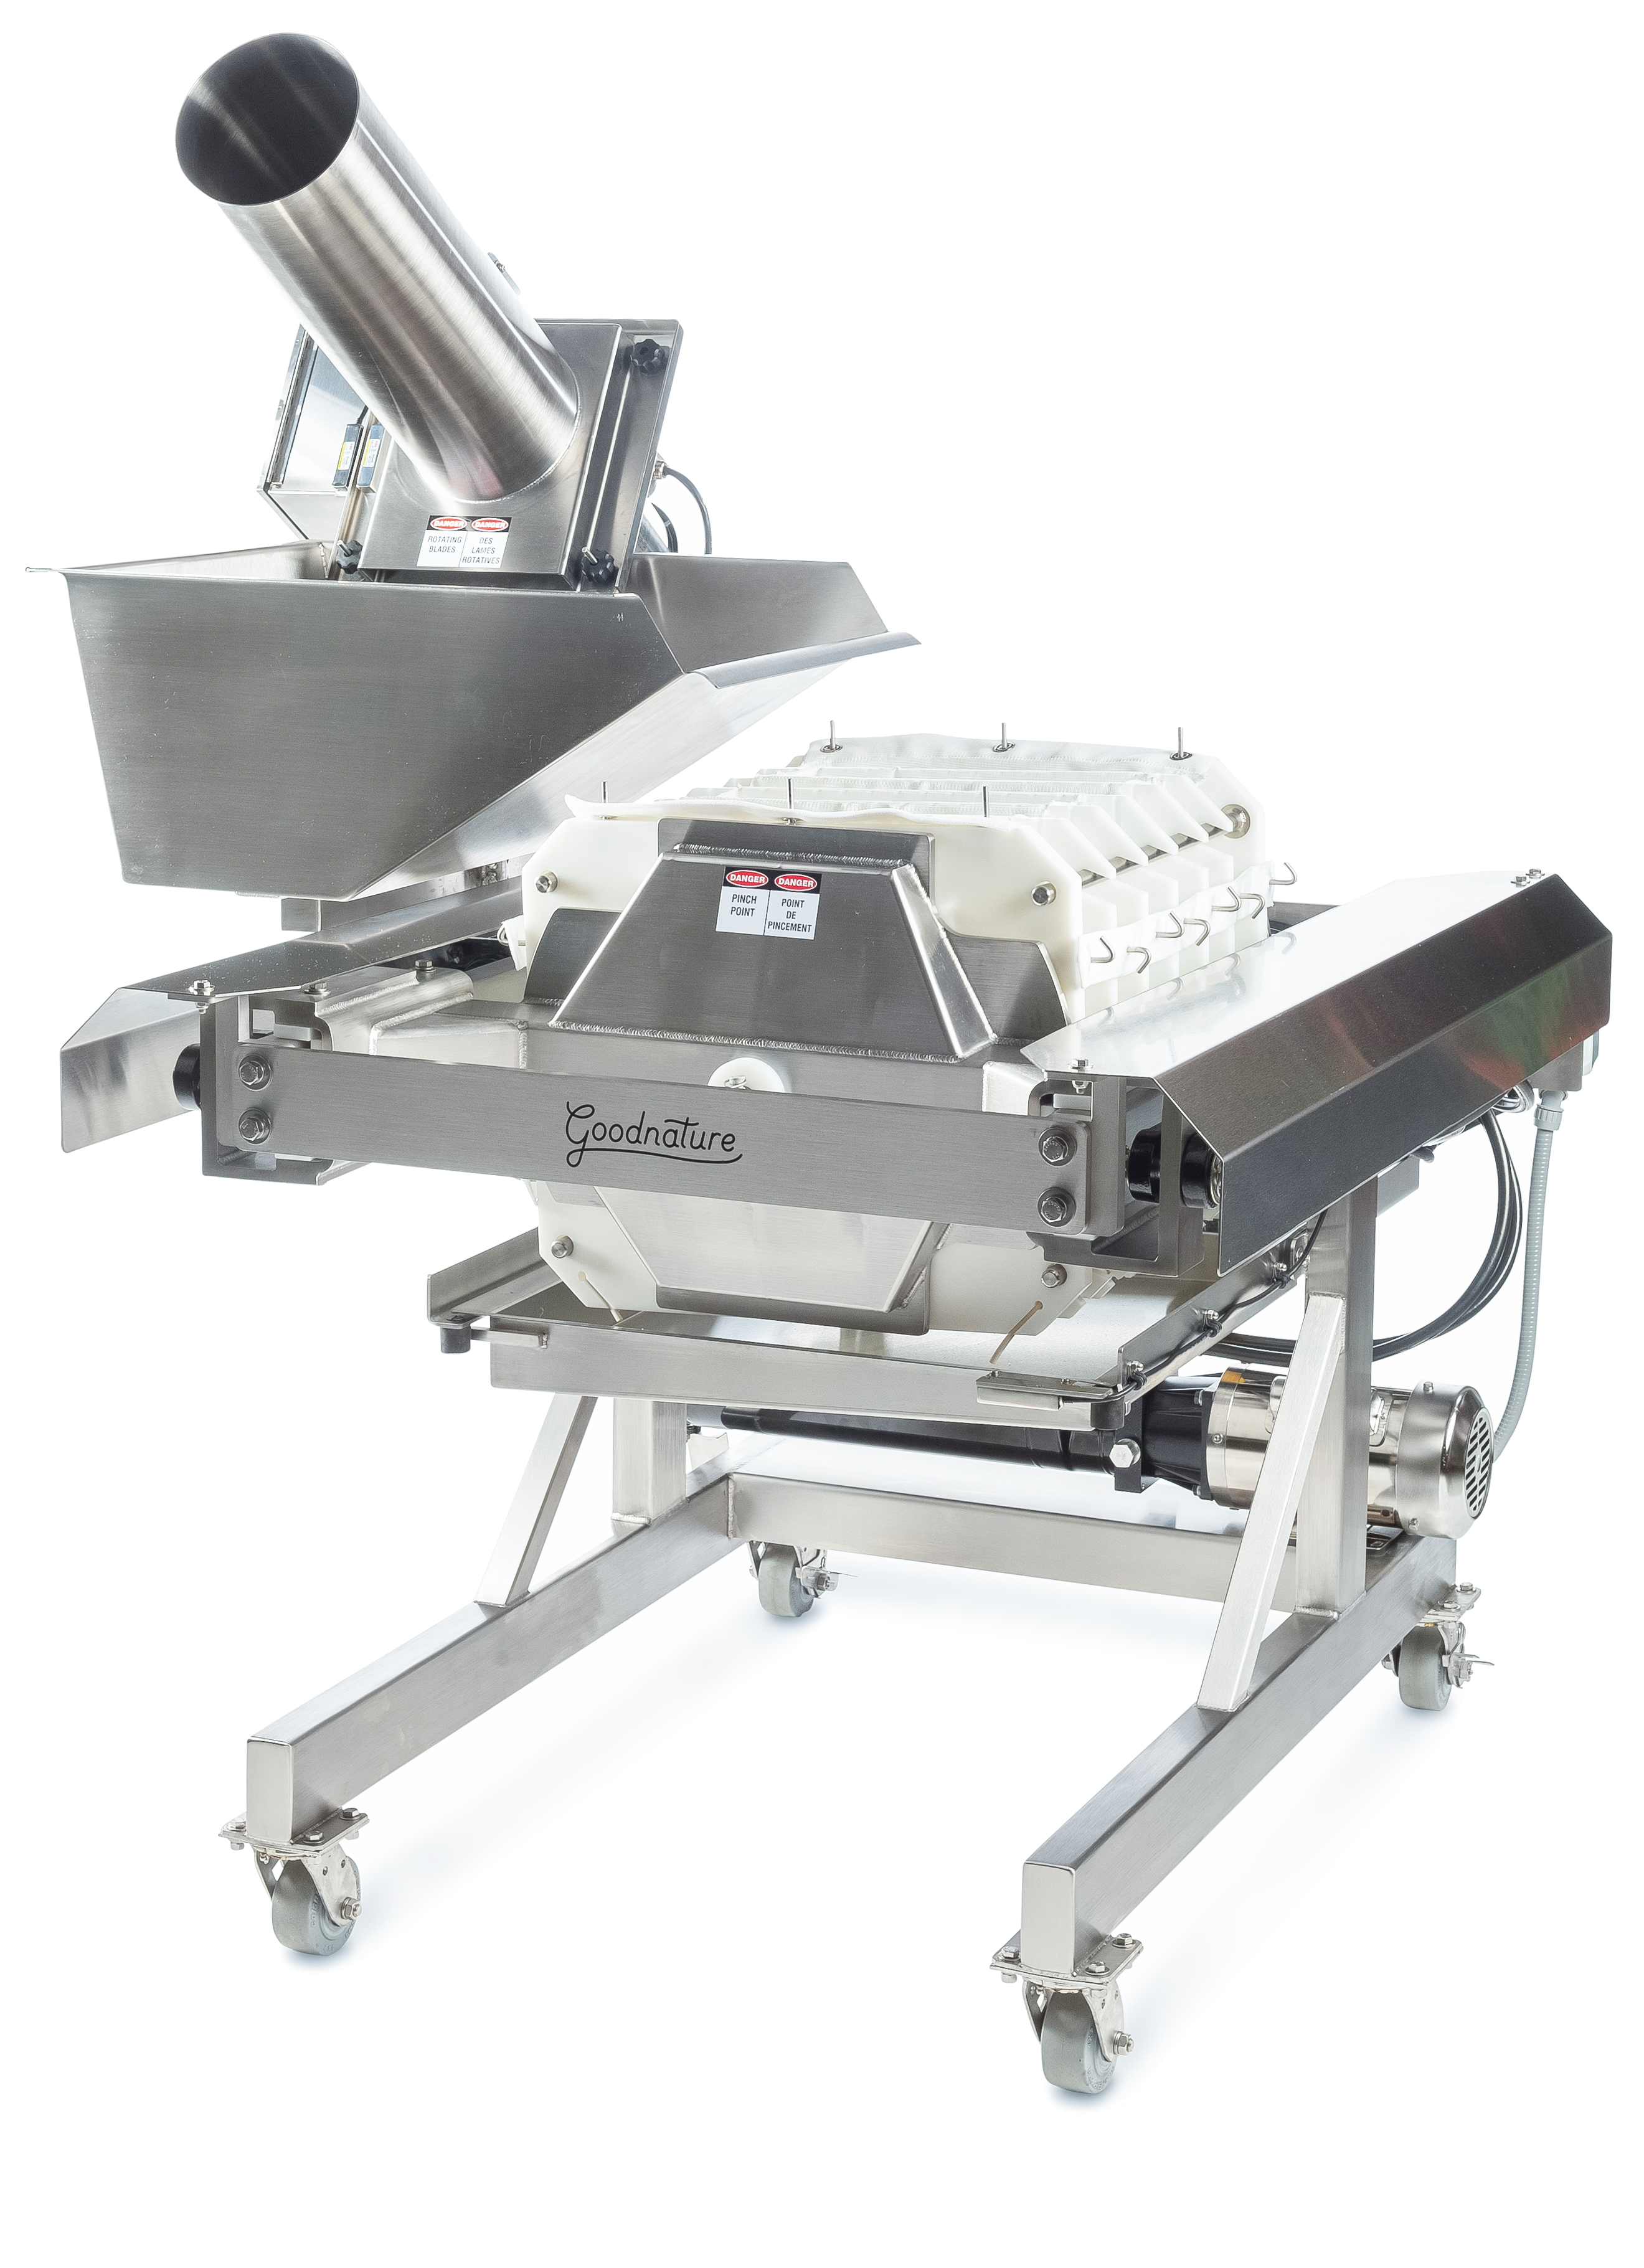 The X-6 contains six X-1 sized press bags, ramping up your commercial juice and cider production. Capable of producing 40 &ndash; 100 US gallons per hour (150 &ndash; 380 liters), the X-6 &nbsp;can make 400 &ndash; 1,000 twelve ounce bottles an hour. Used by cold press juice and cider producers, nut milk producers, and kombucha producers worldwide.